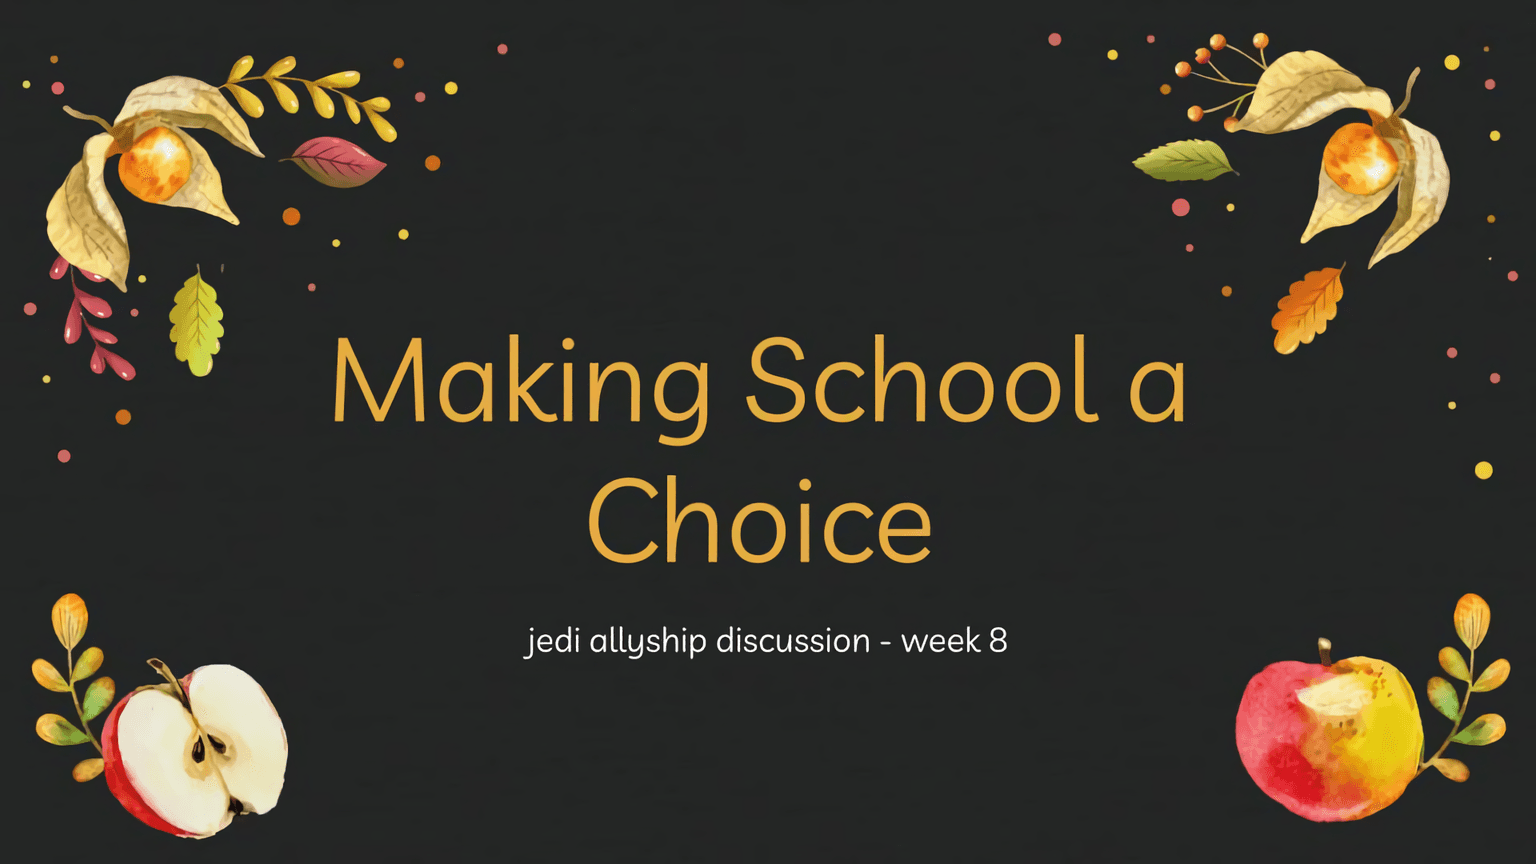 a slide that says "Making School a Choice", with fall-themed decorations like apples and acorns